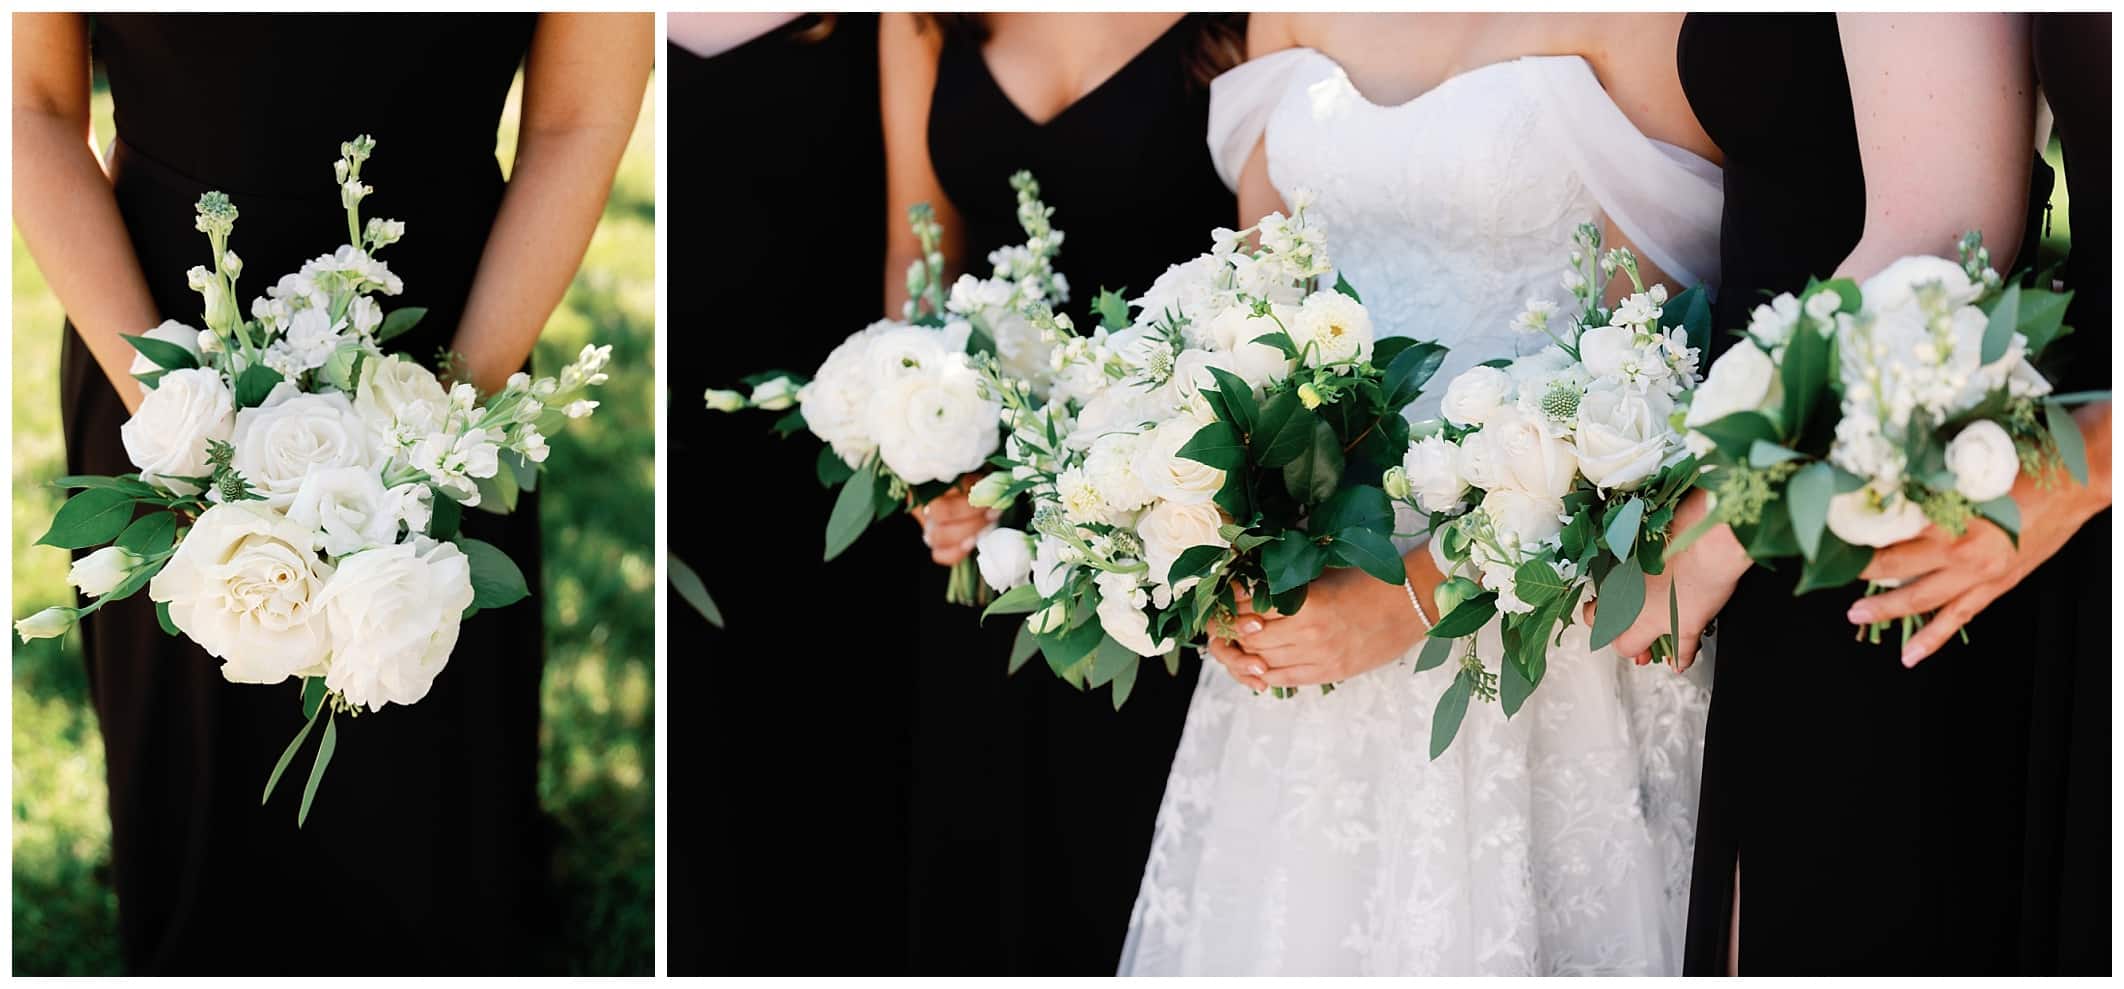 A bride and her bridesmaids are holding white bouquets.